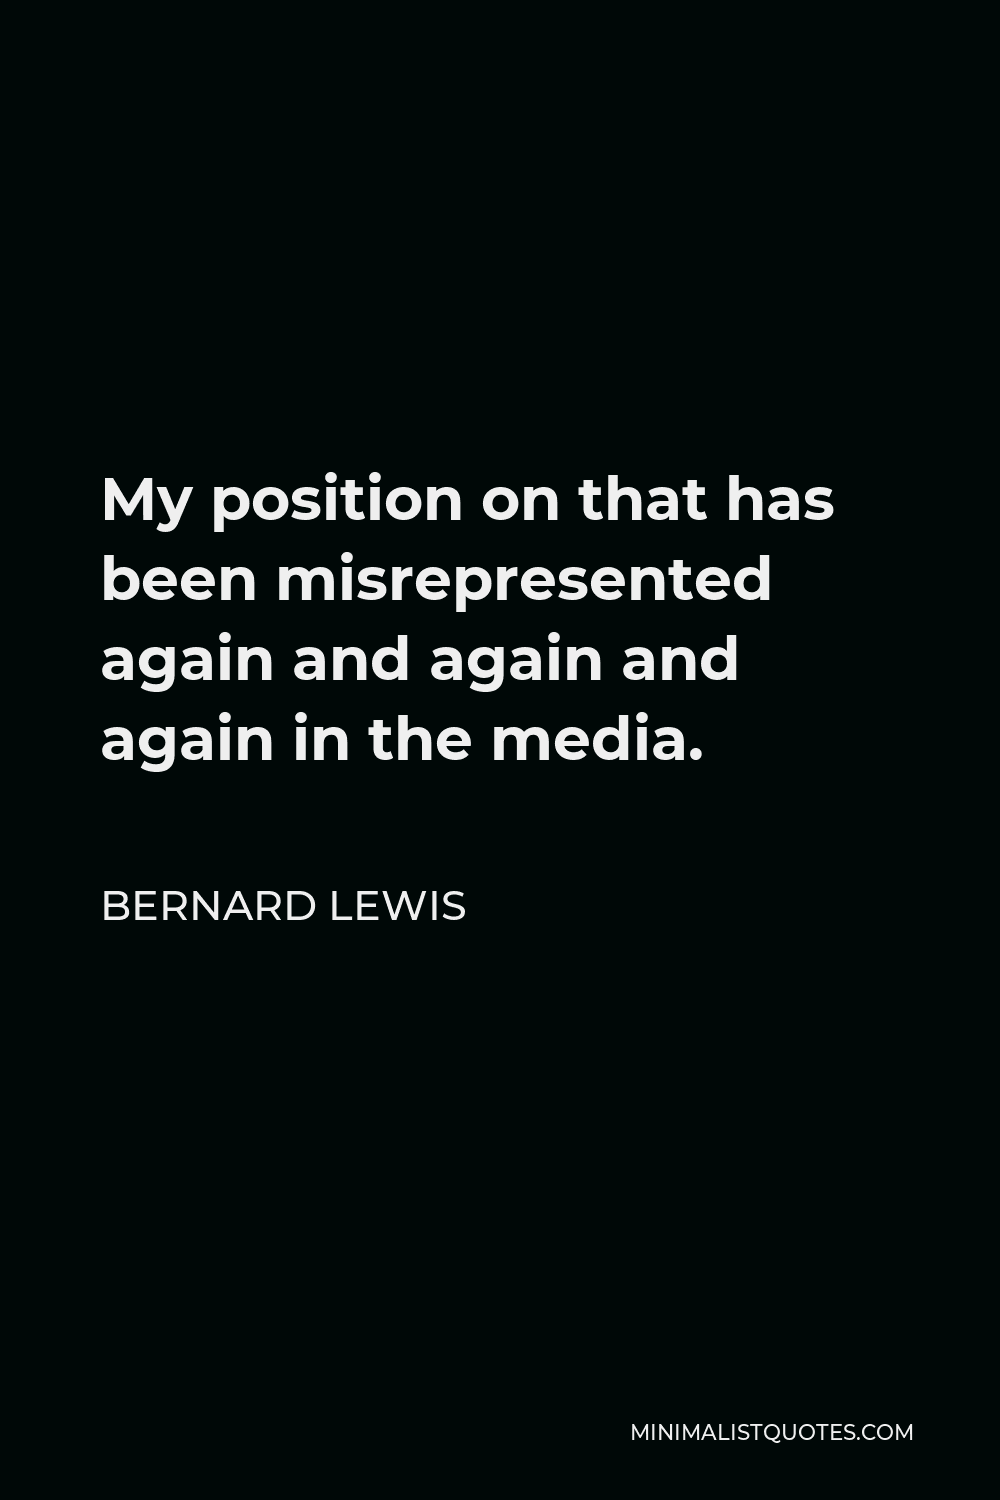 Bernard Lewis Quote - My position on that has been misrepresented again and again and again in the media.